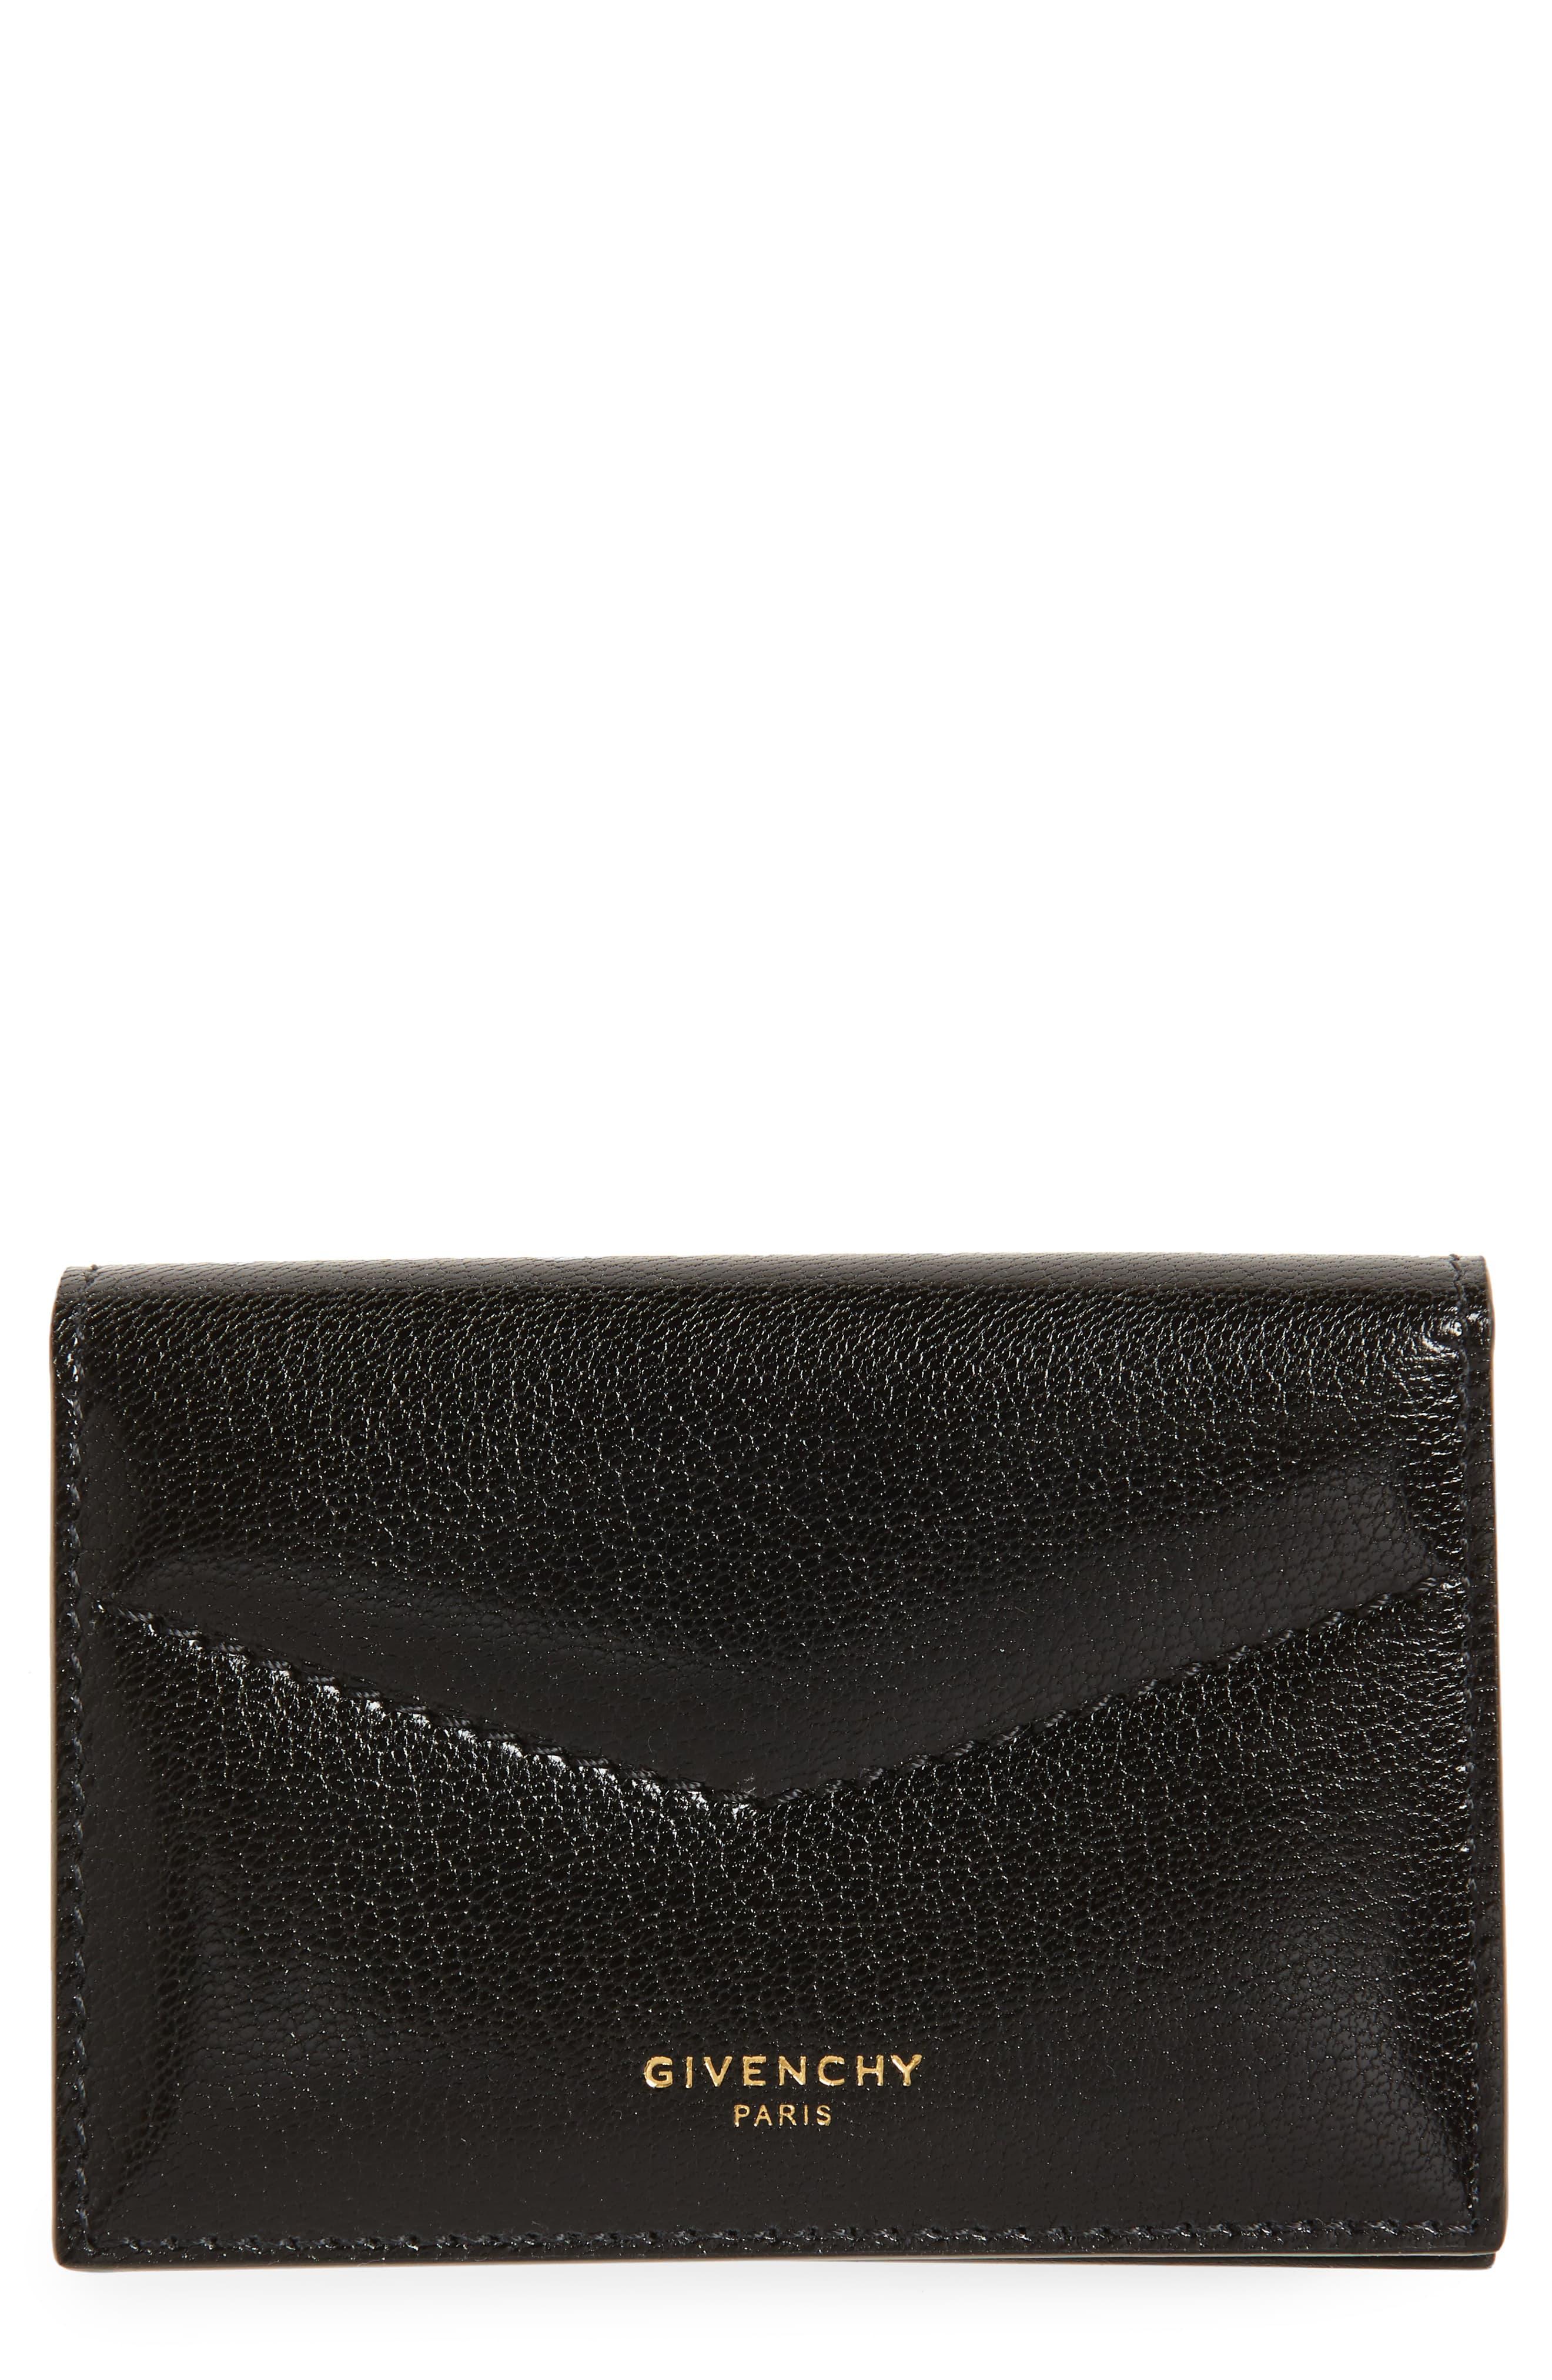 Givenchy Leather Card Holder in Black - Lyst